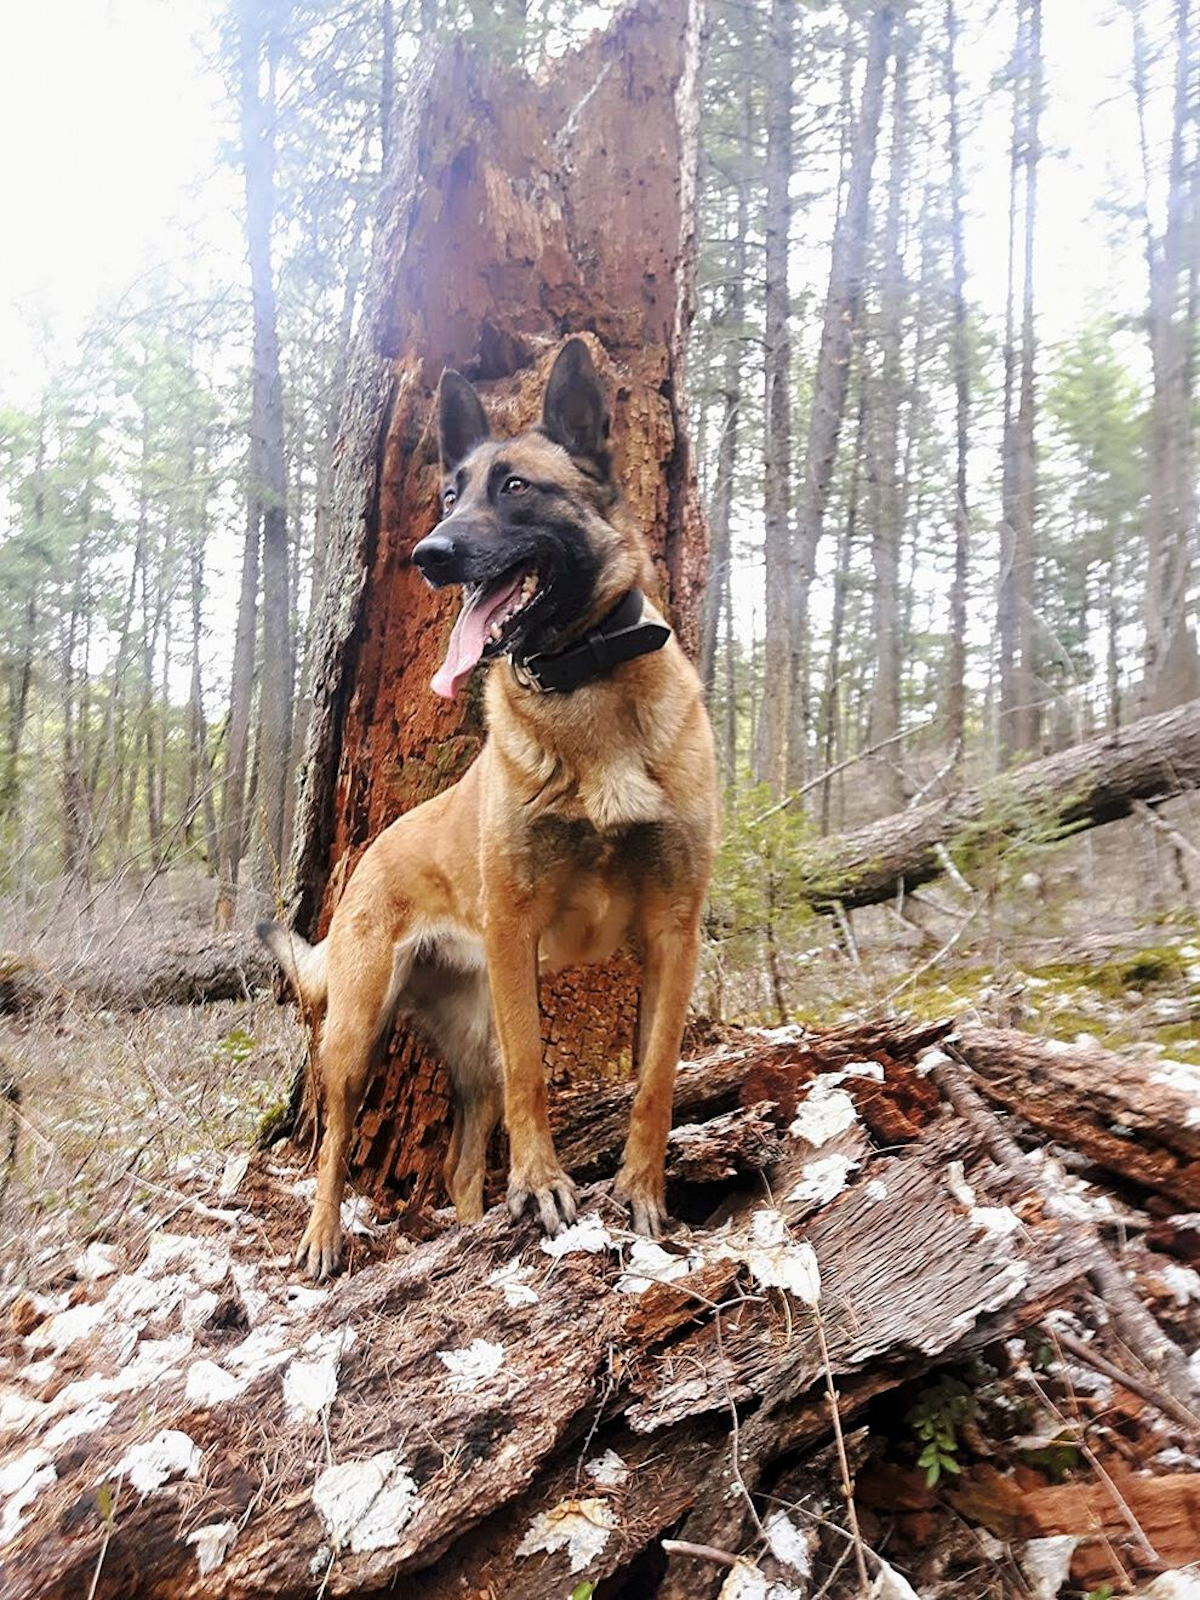 Belgian Malinois dogs are often used because of their high “drive” and compact frames. © Jacqueline Correia